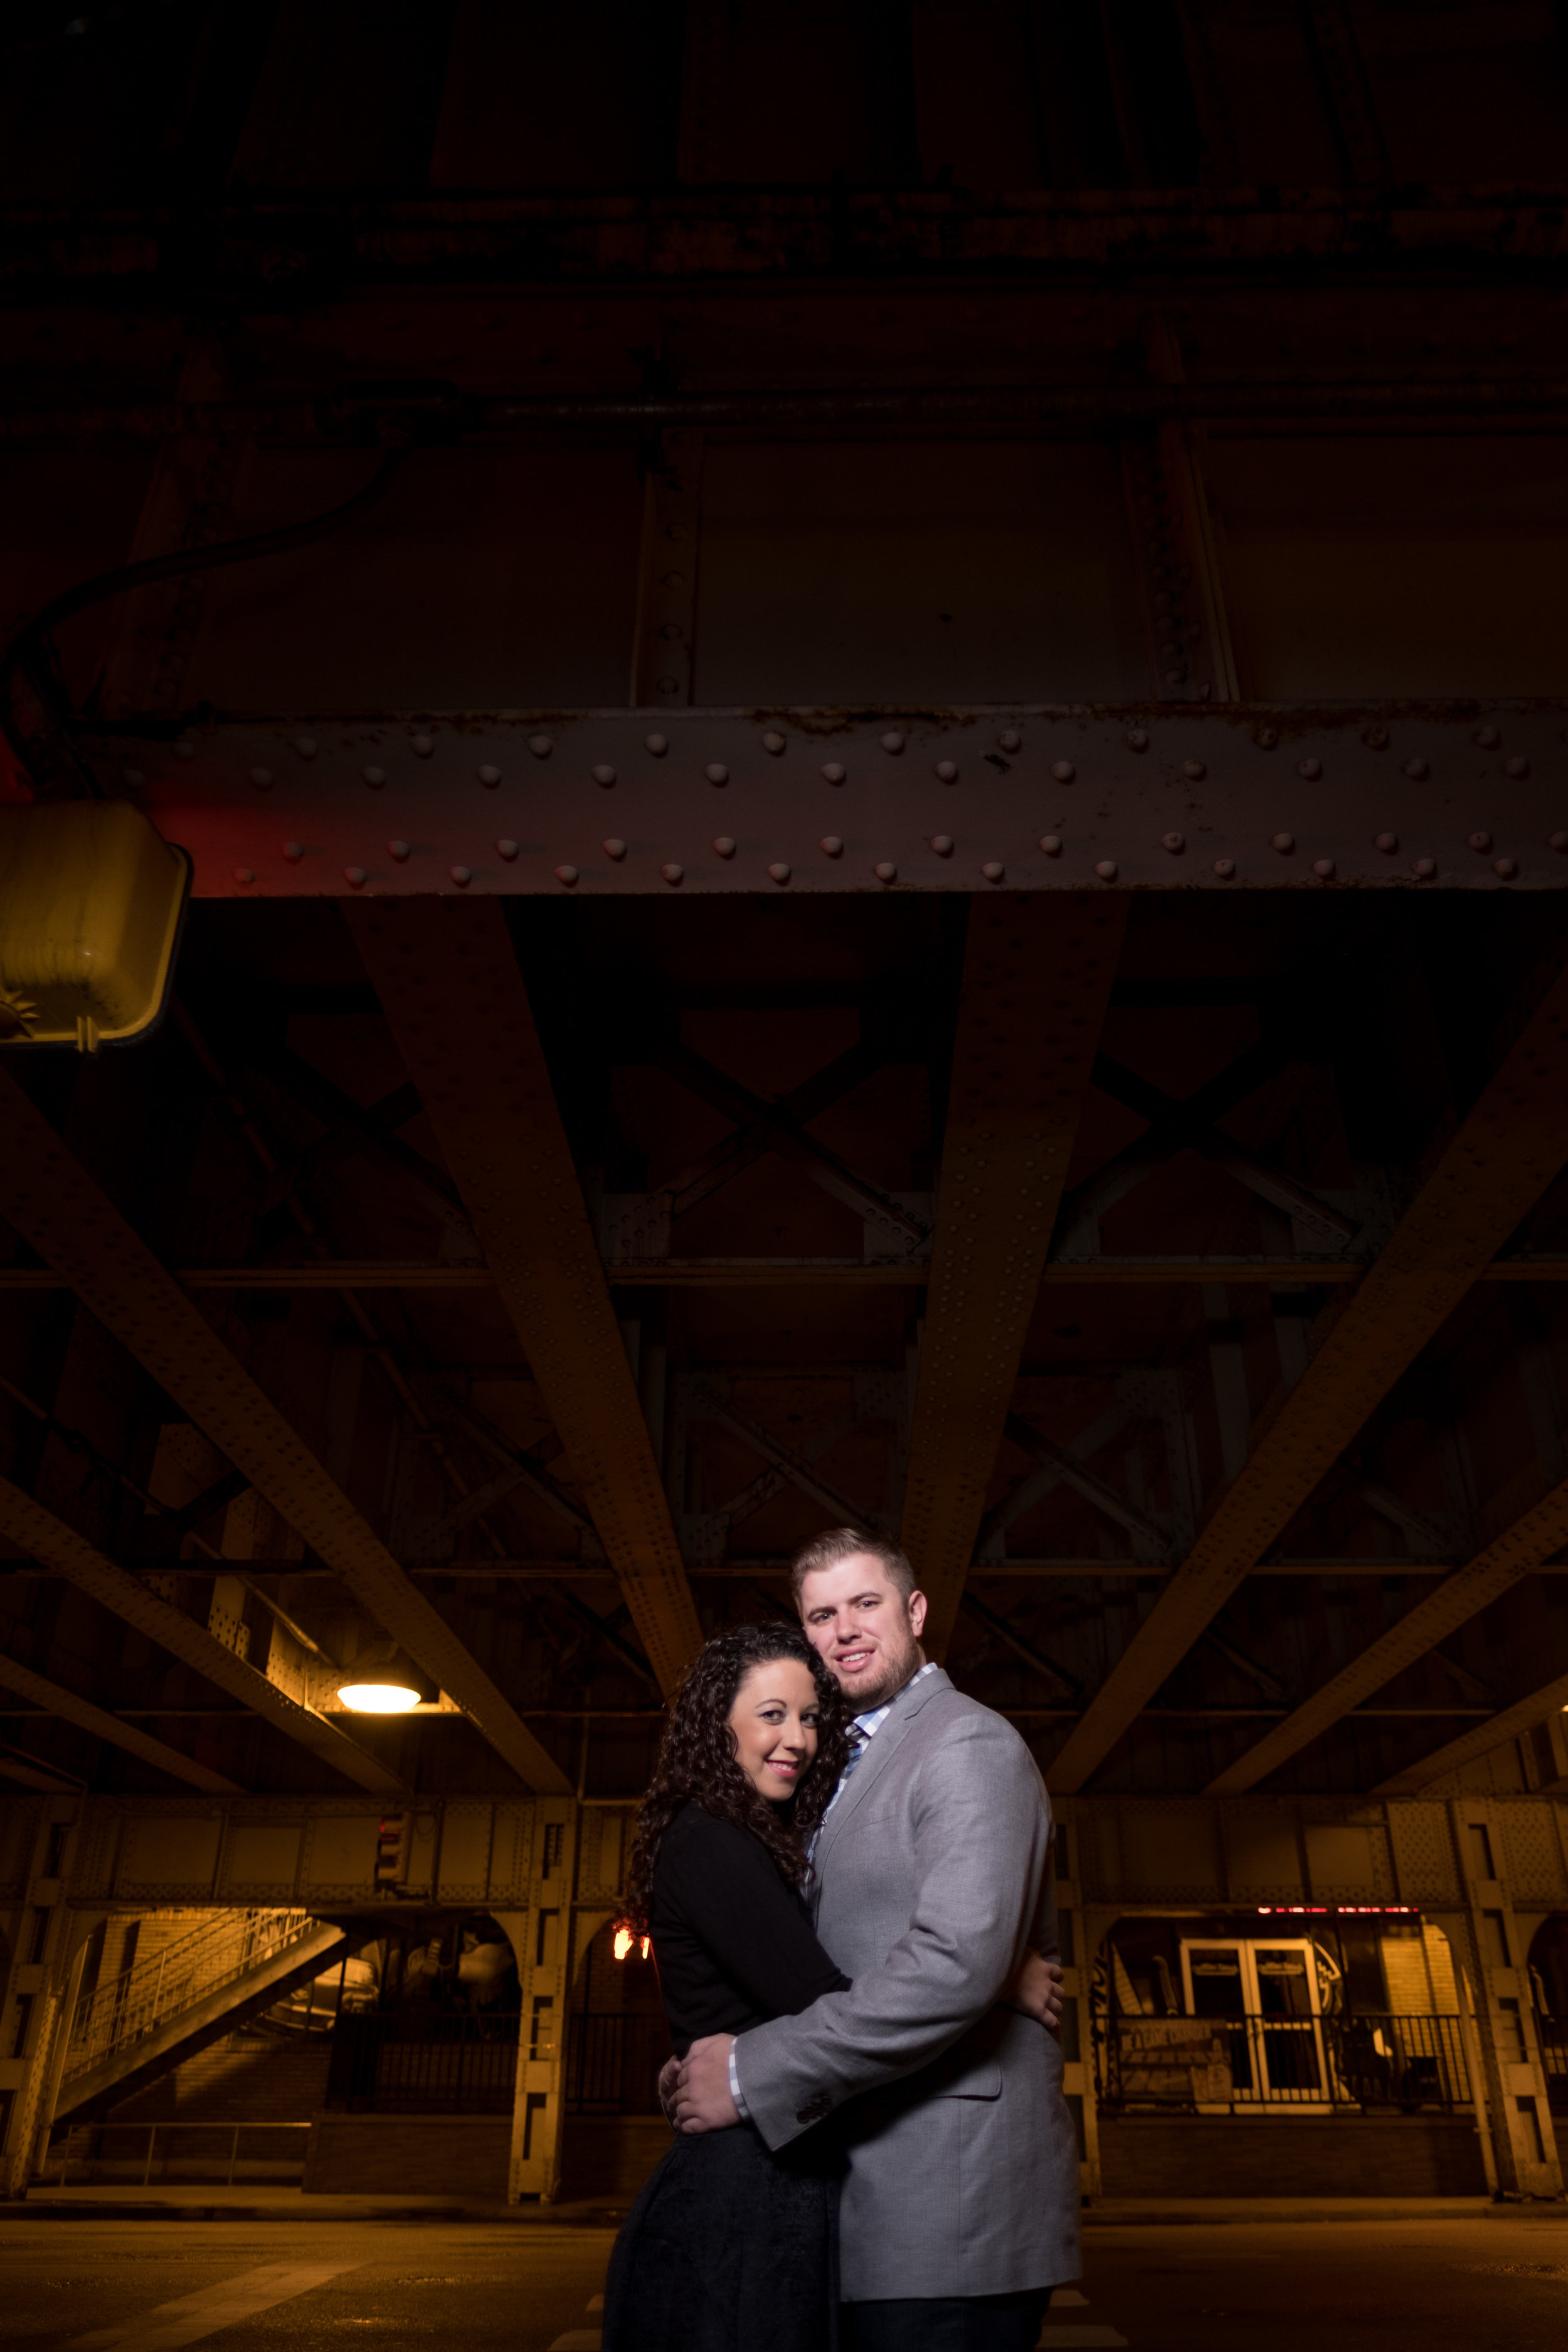 Downtown-Indianapolis-night-engagement-pictures-13.jpg